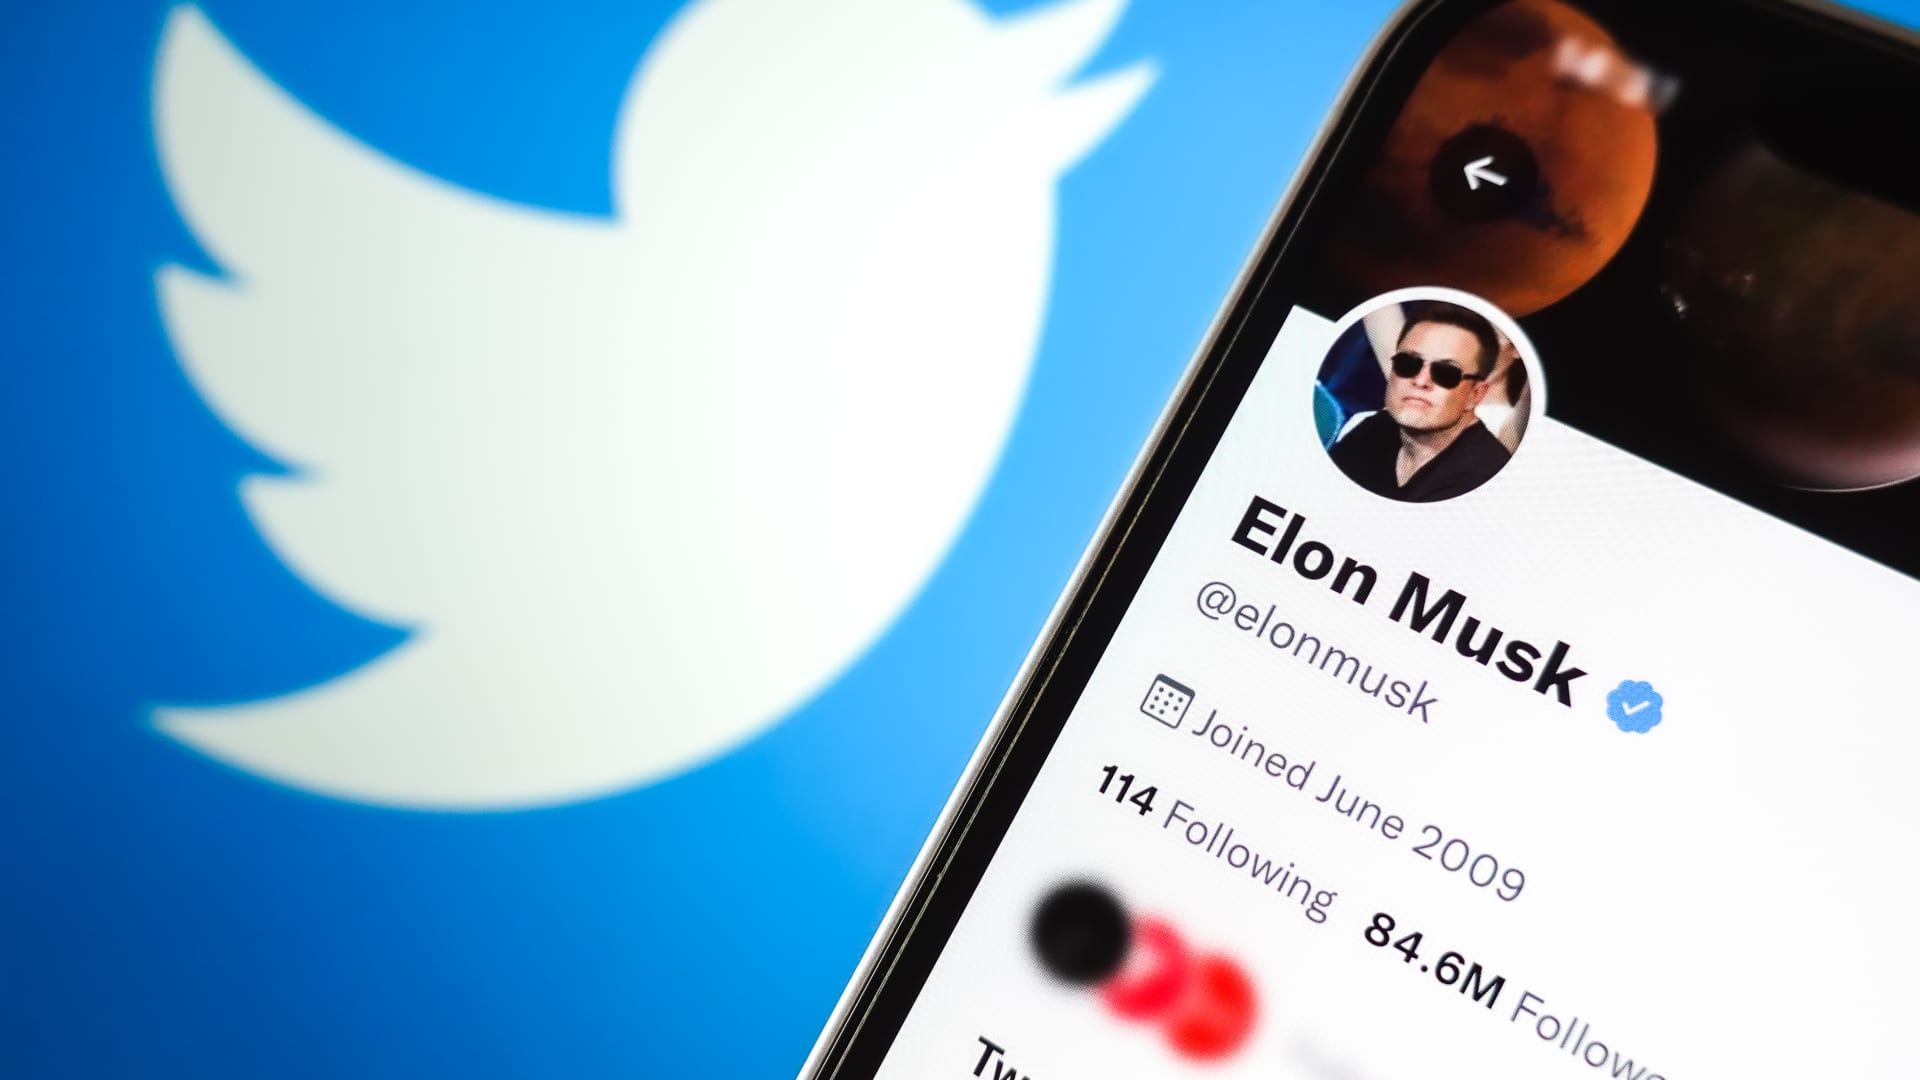 Banned Twitter users won't return for at least another few weeks, Musk says